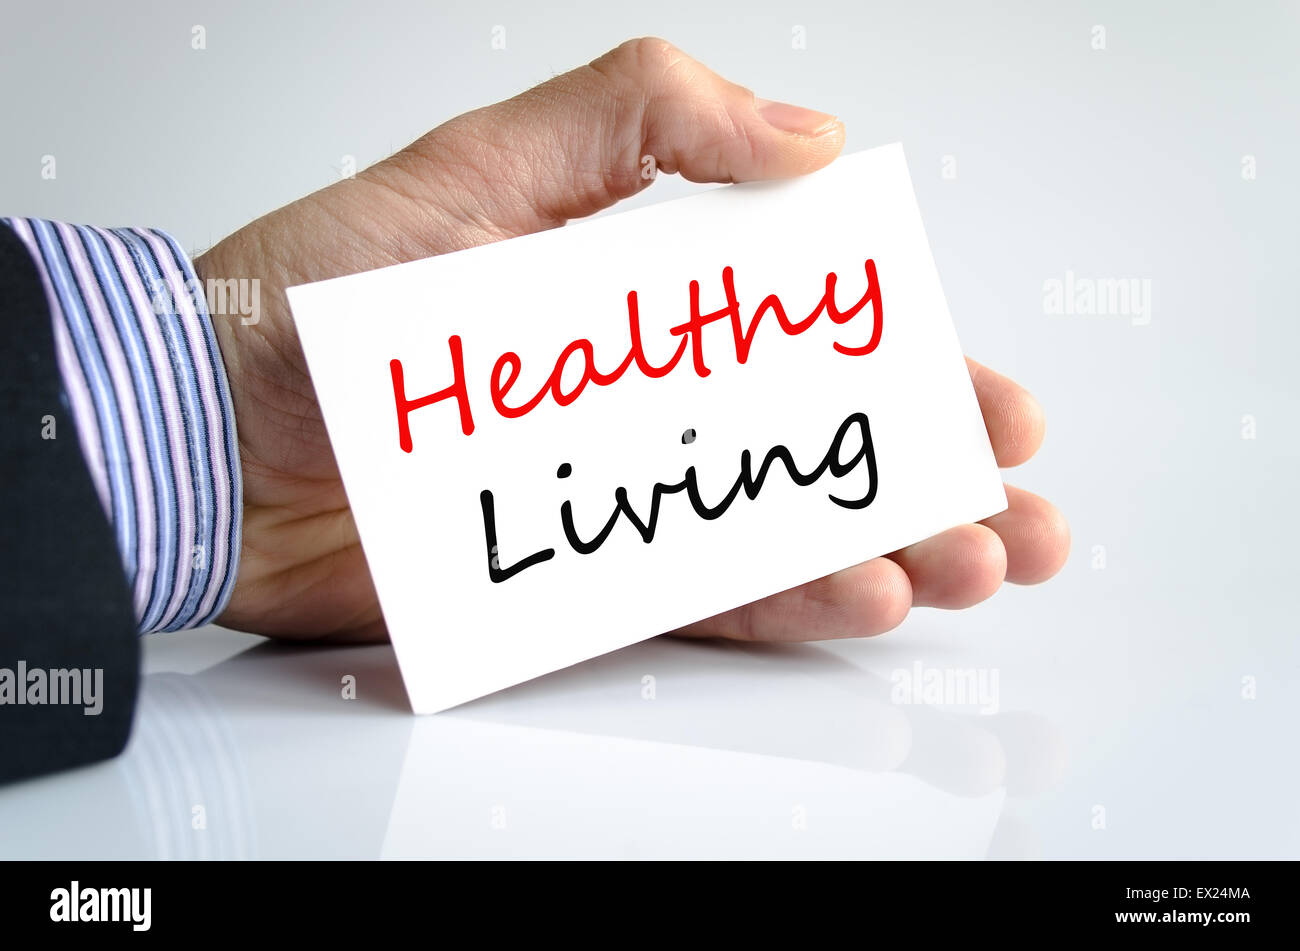 Healthy living text note in business man hand Stock Photo